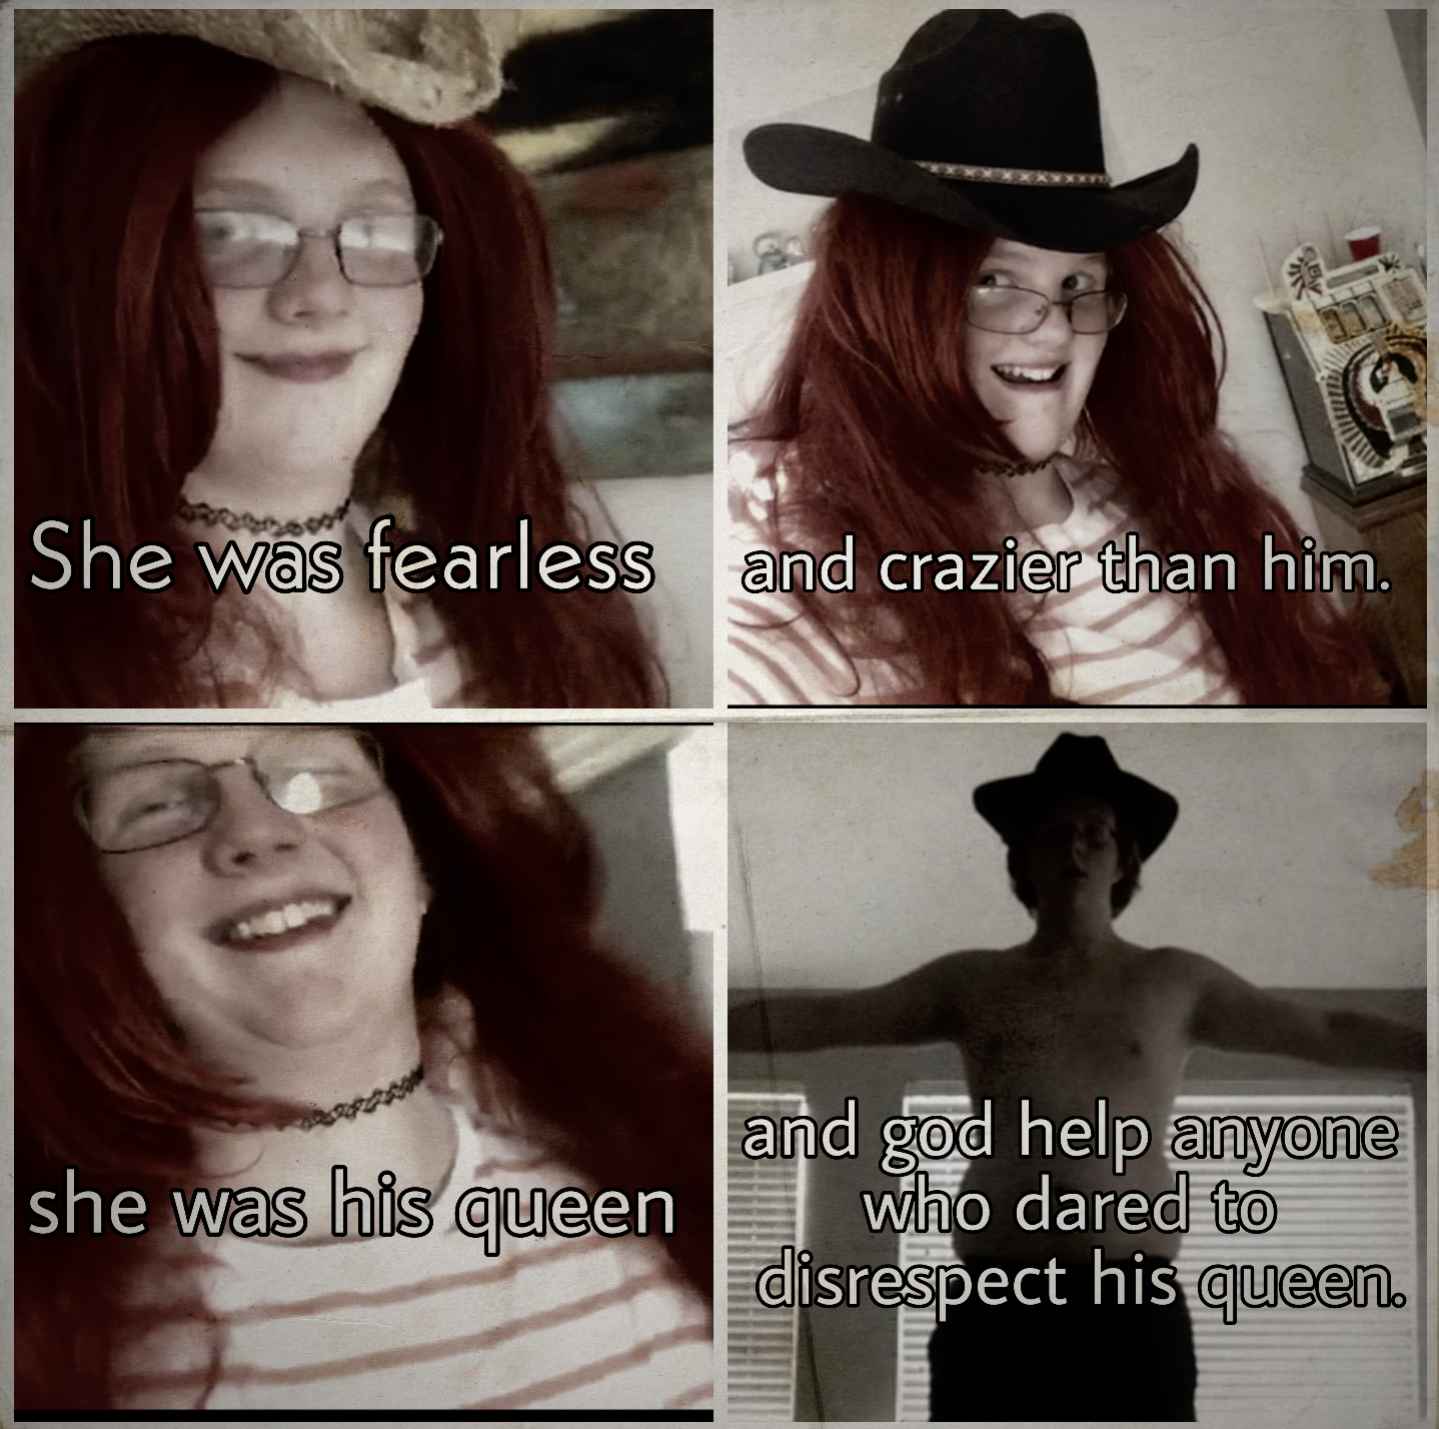 legbeard cringe - She was fearless and crazier than him. she was his queen and god help anyone who dared to disrespect his queen.